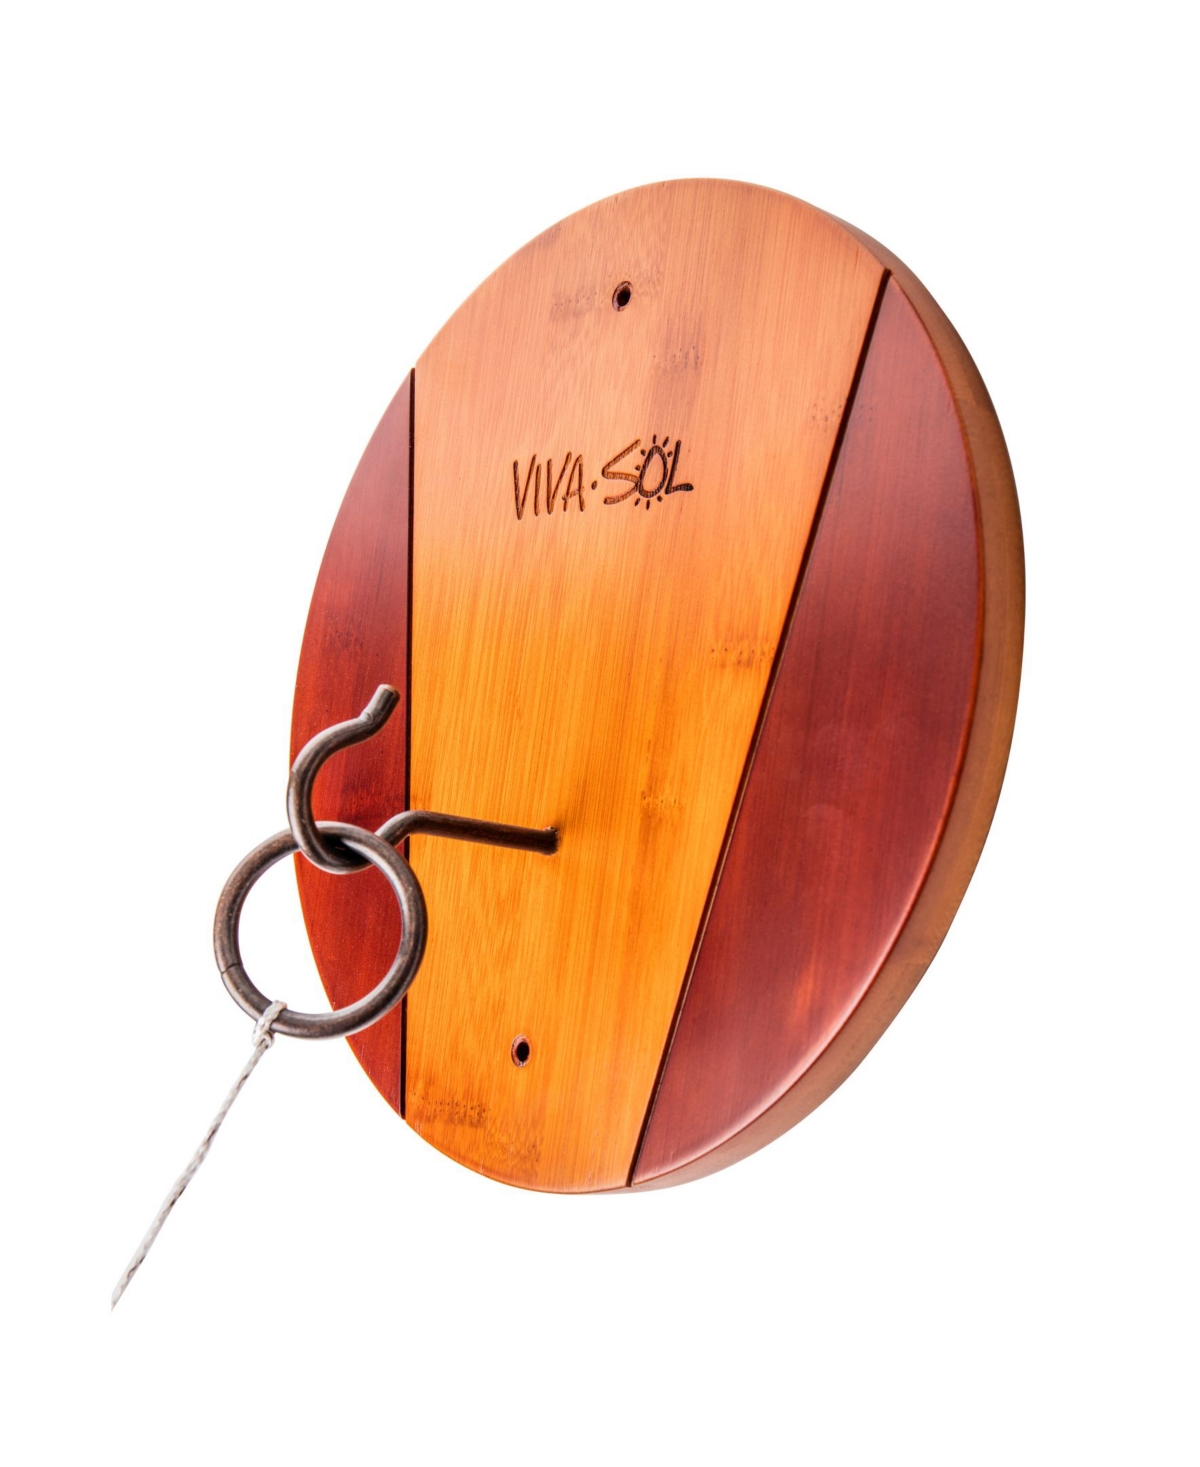 Viva Sol Premium All-Wood Walnut Finish Hook and Ring Target Game for Use Indoors and Outdoors